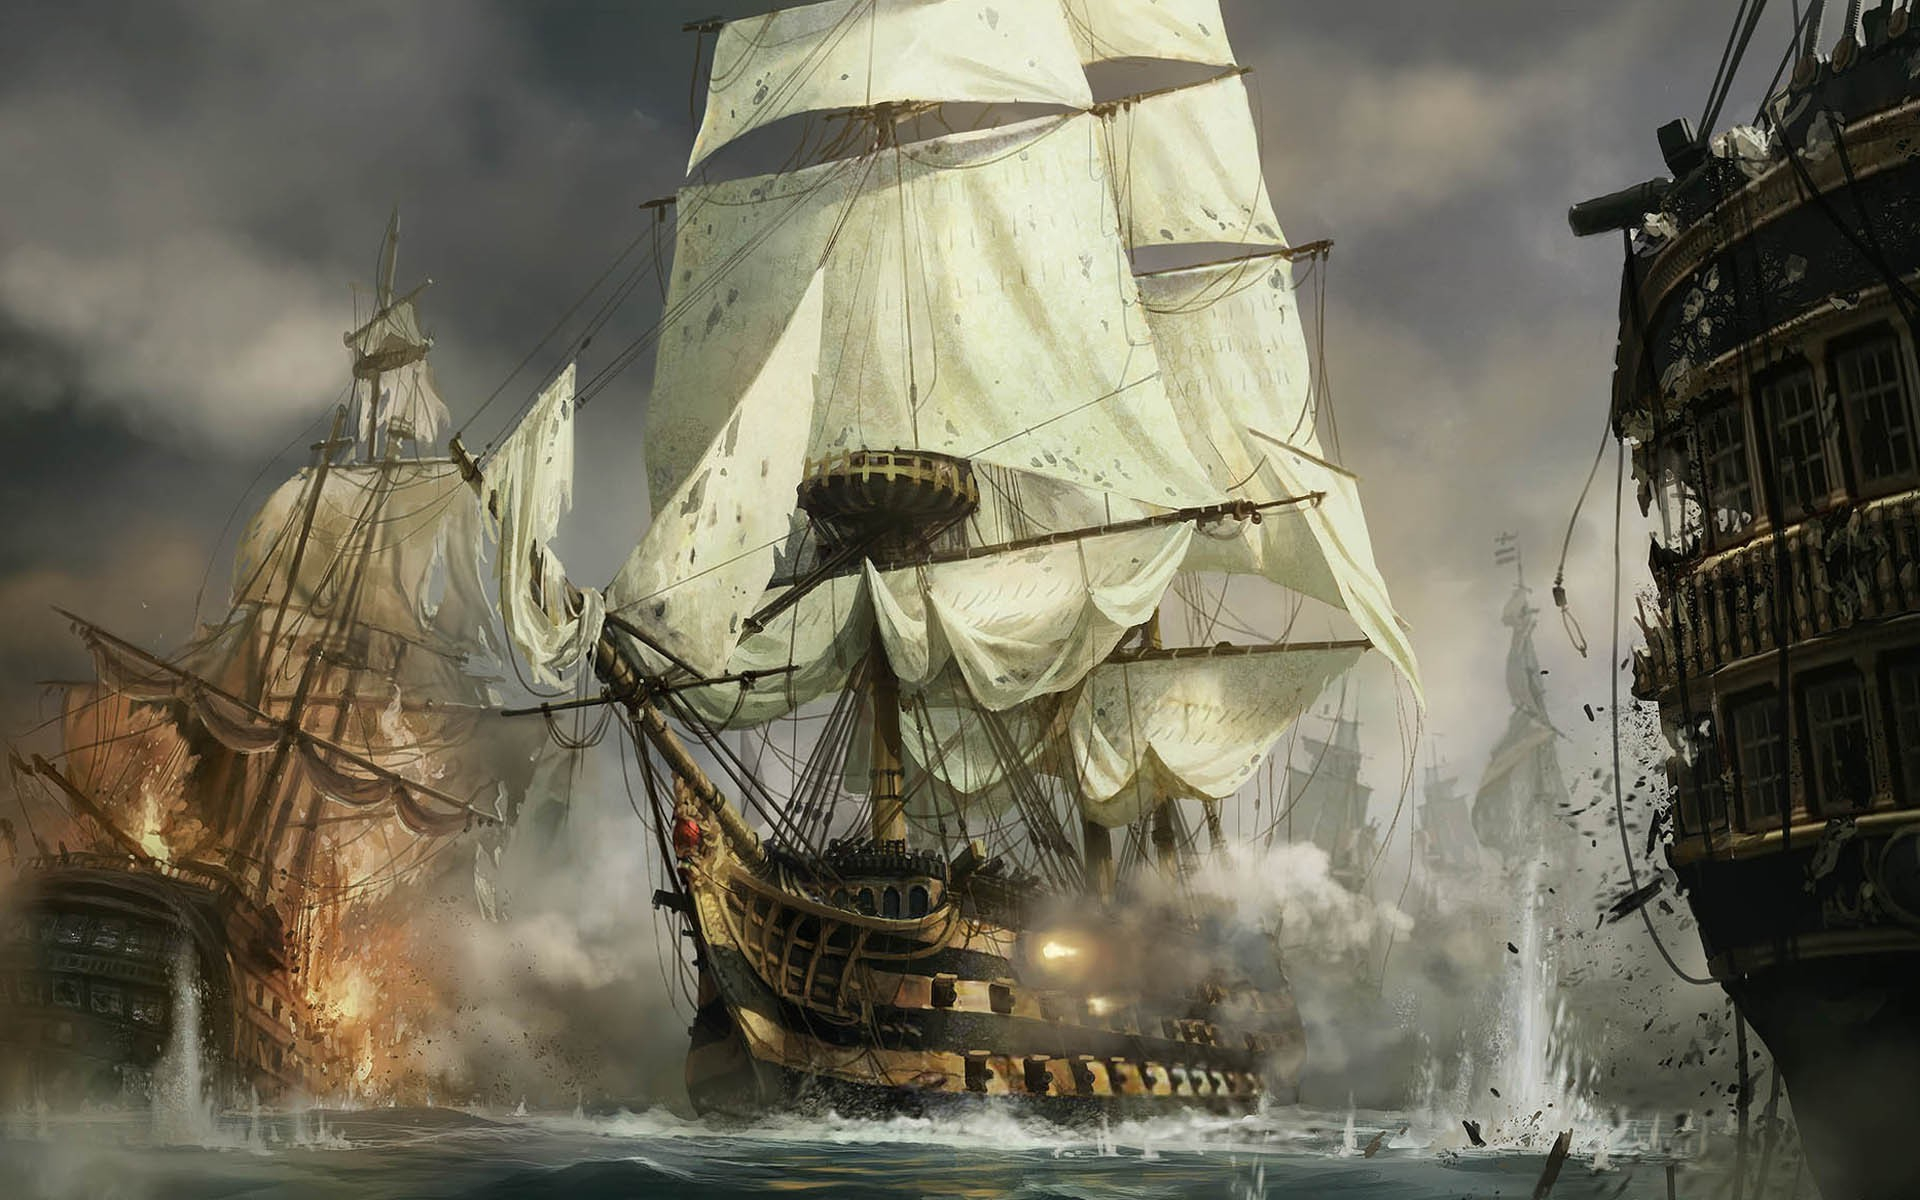 1920x1200 Wallpaper : boat, sailing ship, sea, vehicle, old ship, ghost ship, watercraft, px, frigate, ship of the line, galleon, caravel 4kWallpaper 518086 HD Wallpapers